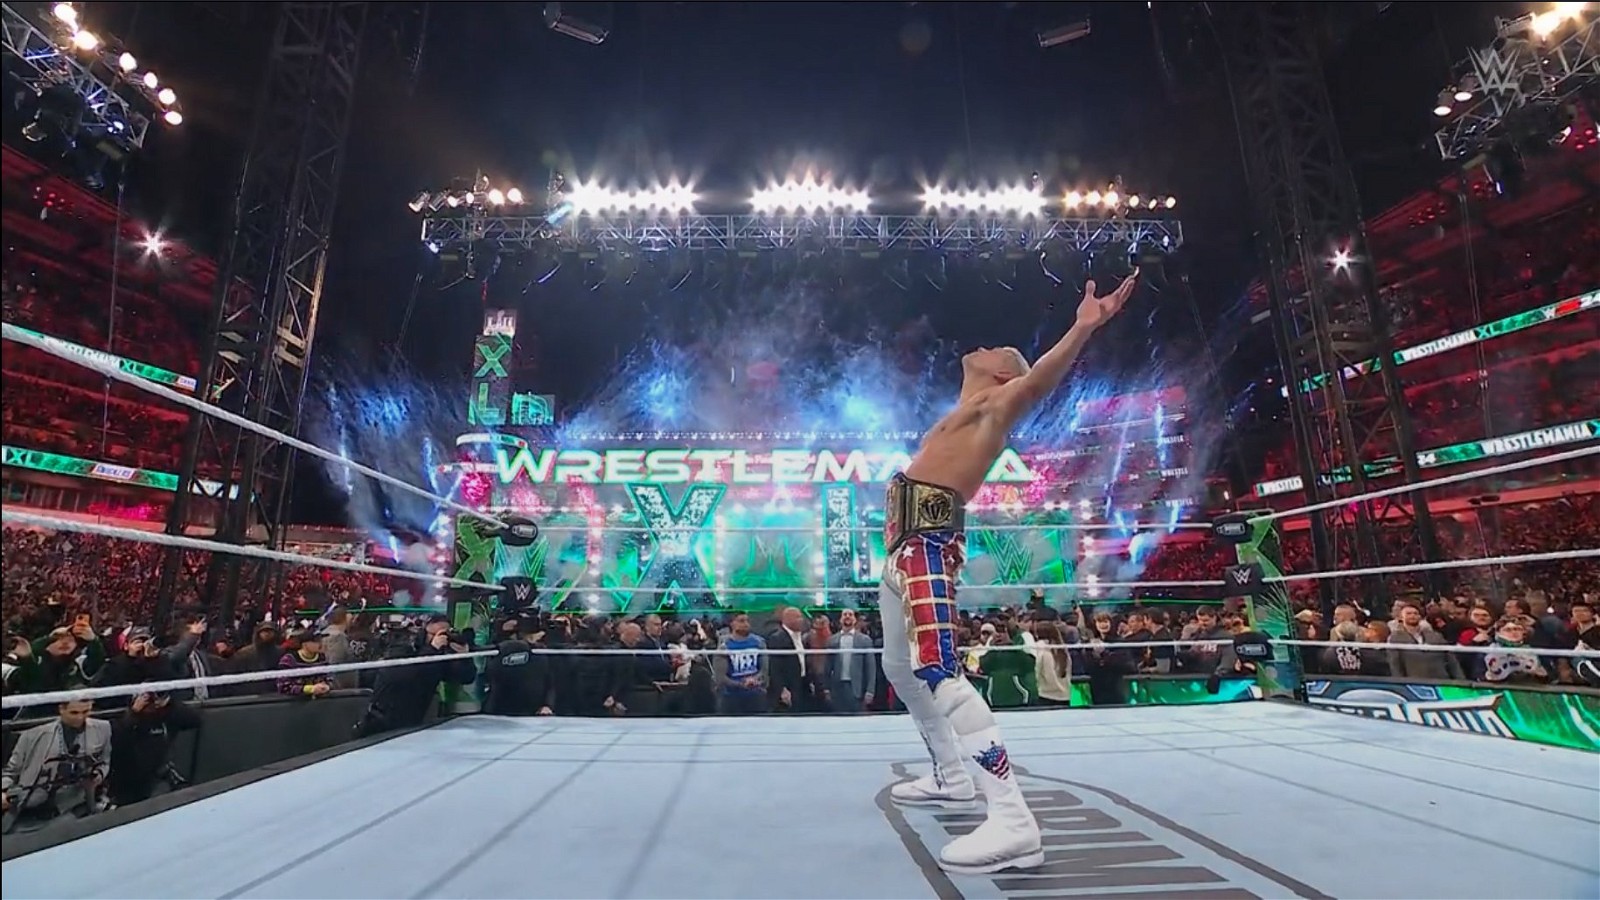 Cody Rhodes's victory was an emotional moment for fans and other WWE superstars